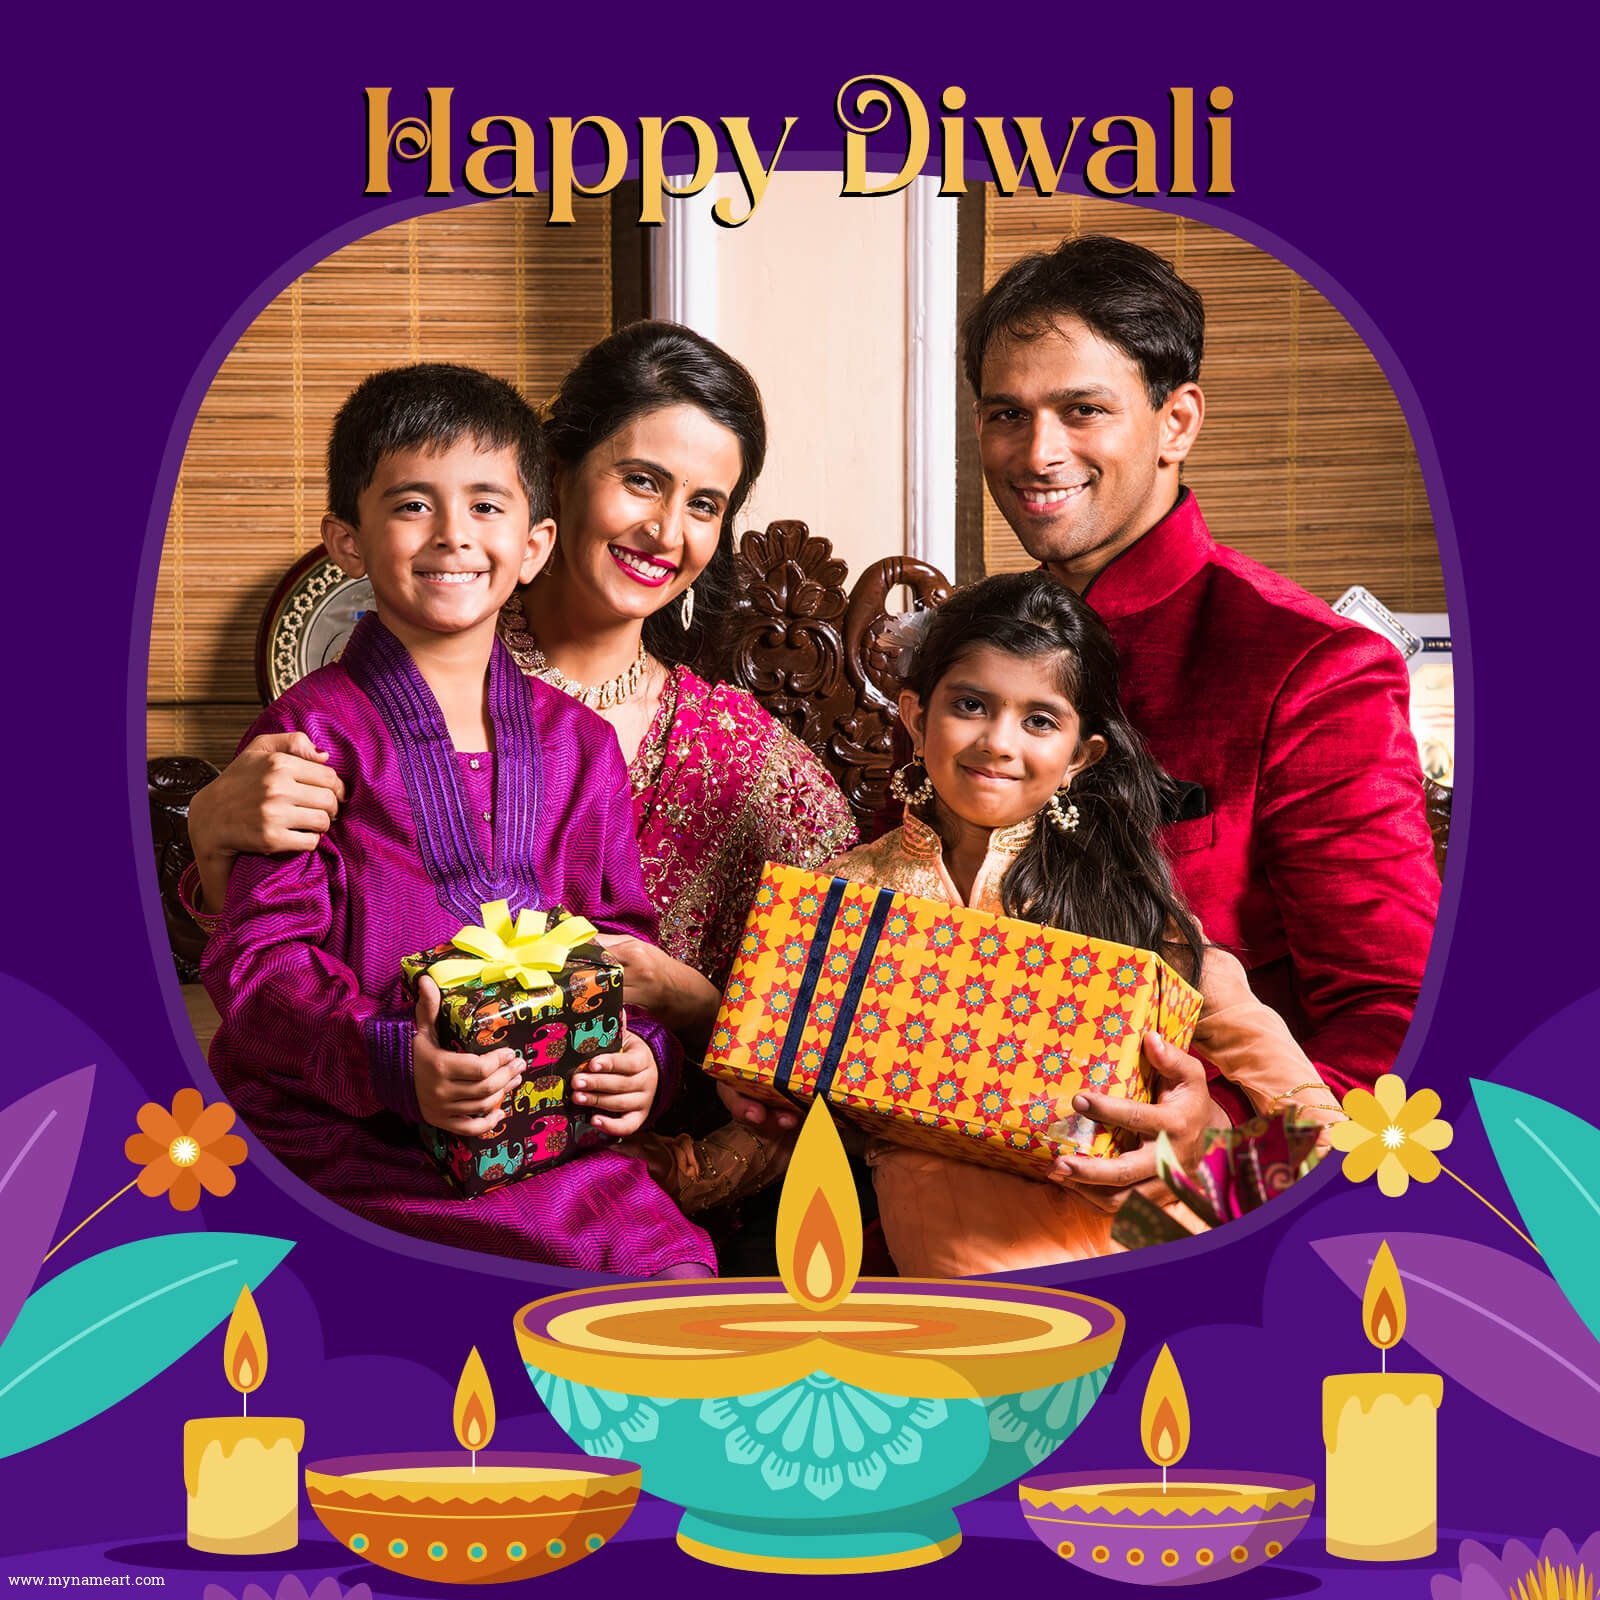 FREE Diwali Photo And Name Greetings Cards. Create And Shares In Seconds!